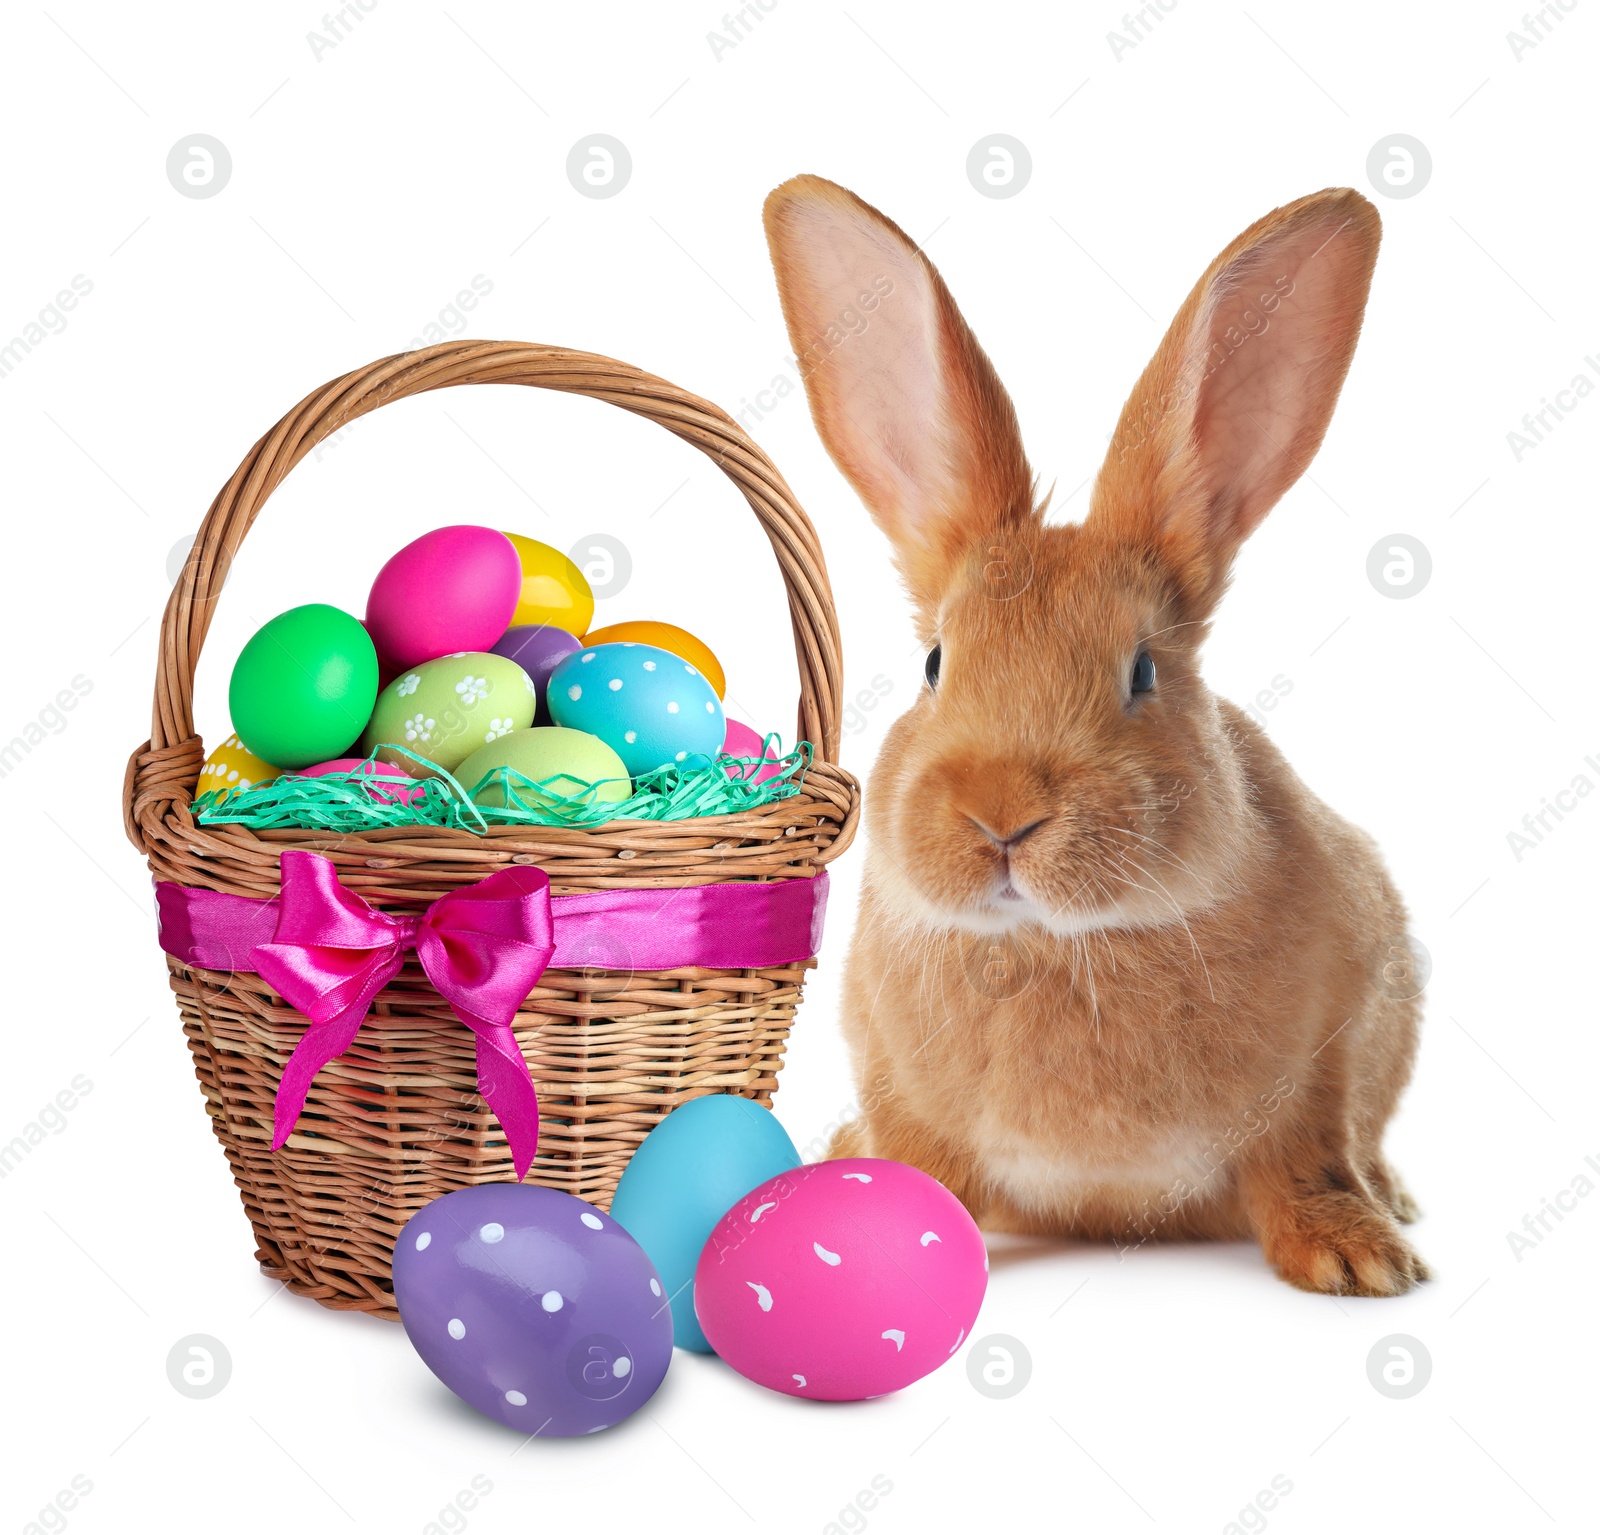 Image of Cute bunny and wicker basket with bright Easter eggs on white background